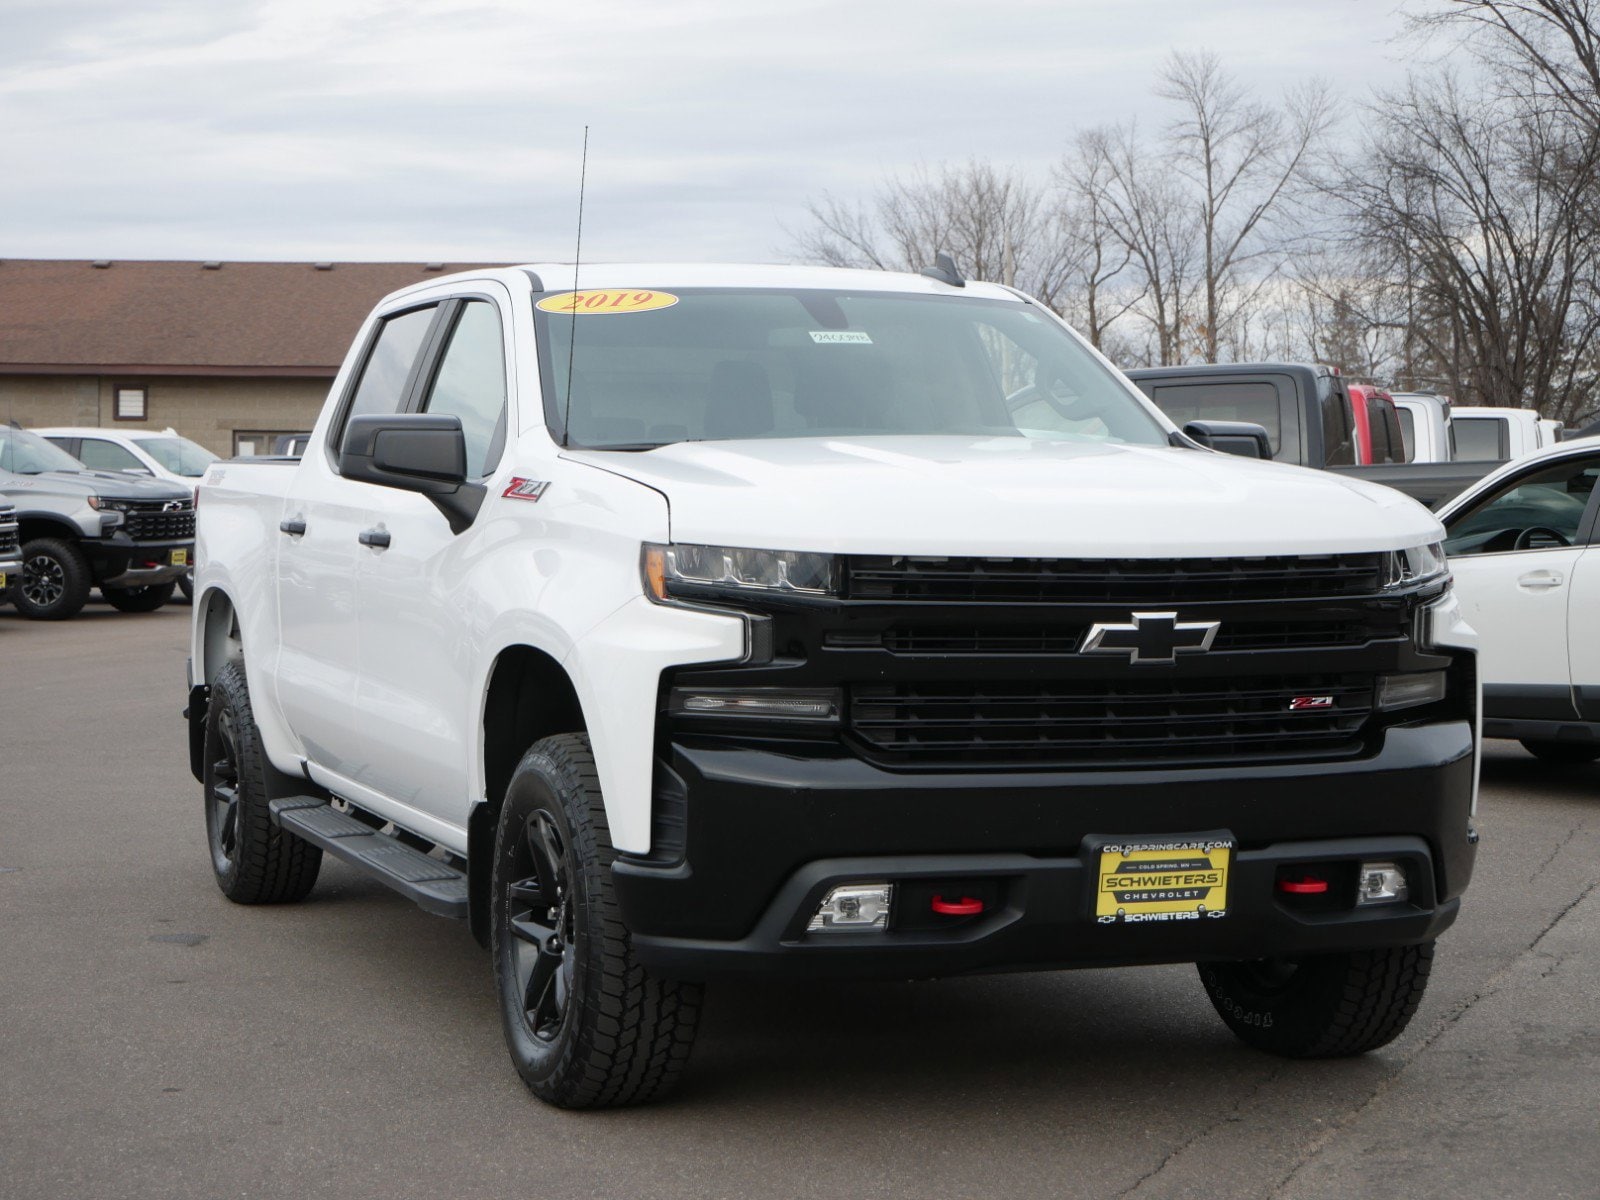 Used 2019 Chevrolet Silverado 1500 LT Trail Boss with VIN 1GCPYFED6KZ145600 for sale in Cold Spring, Minnesota